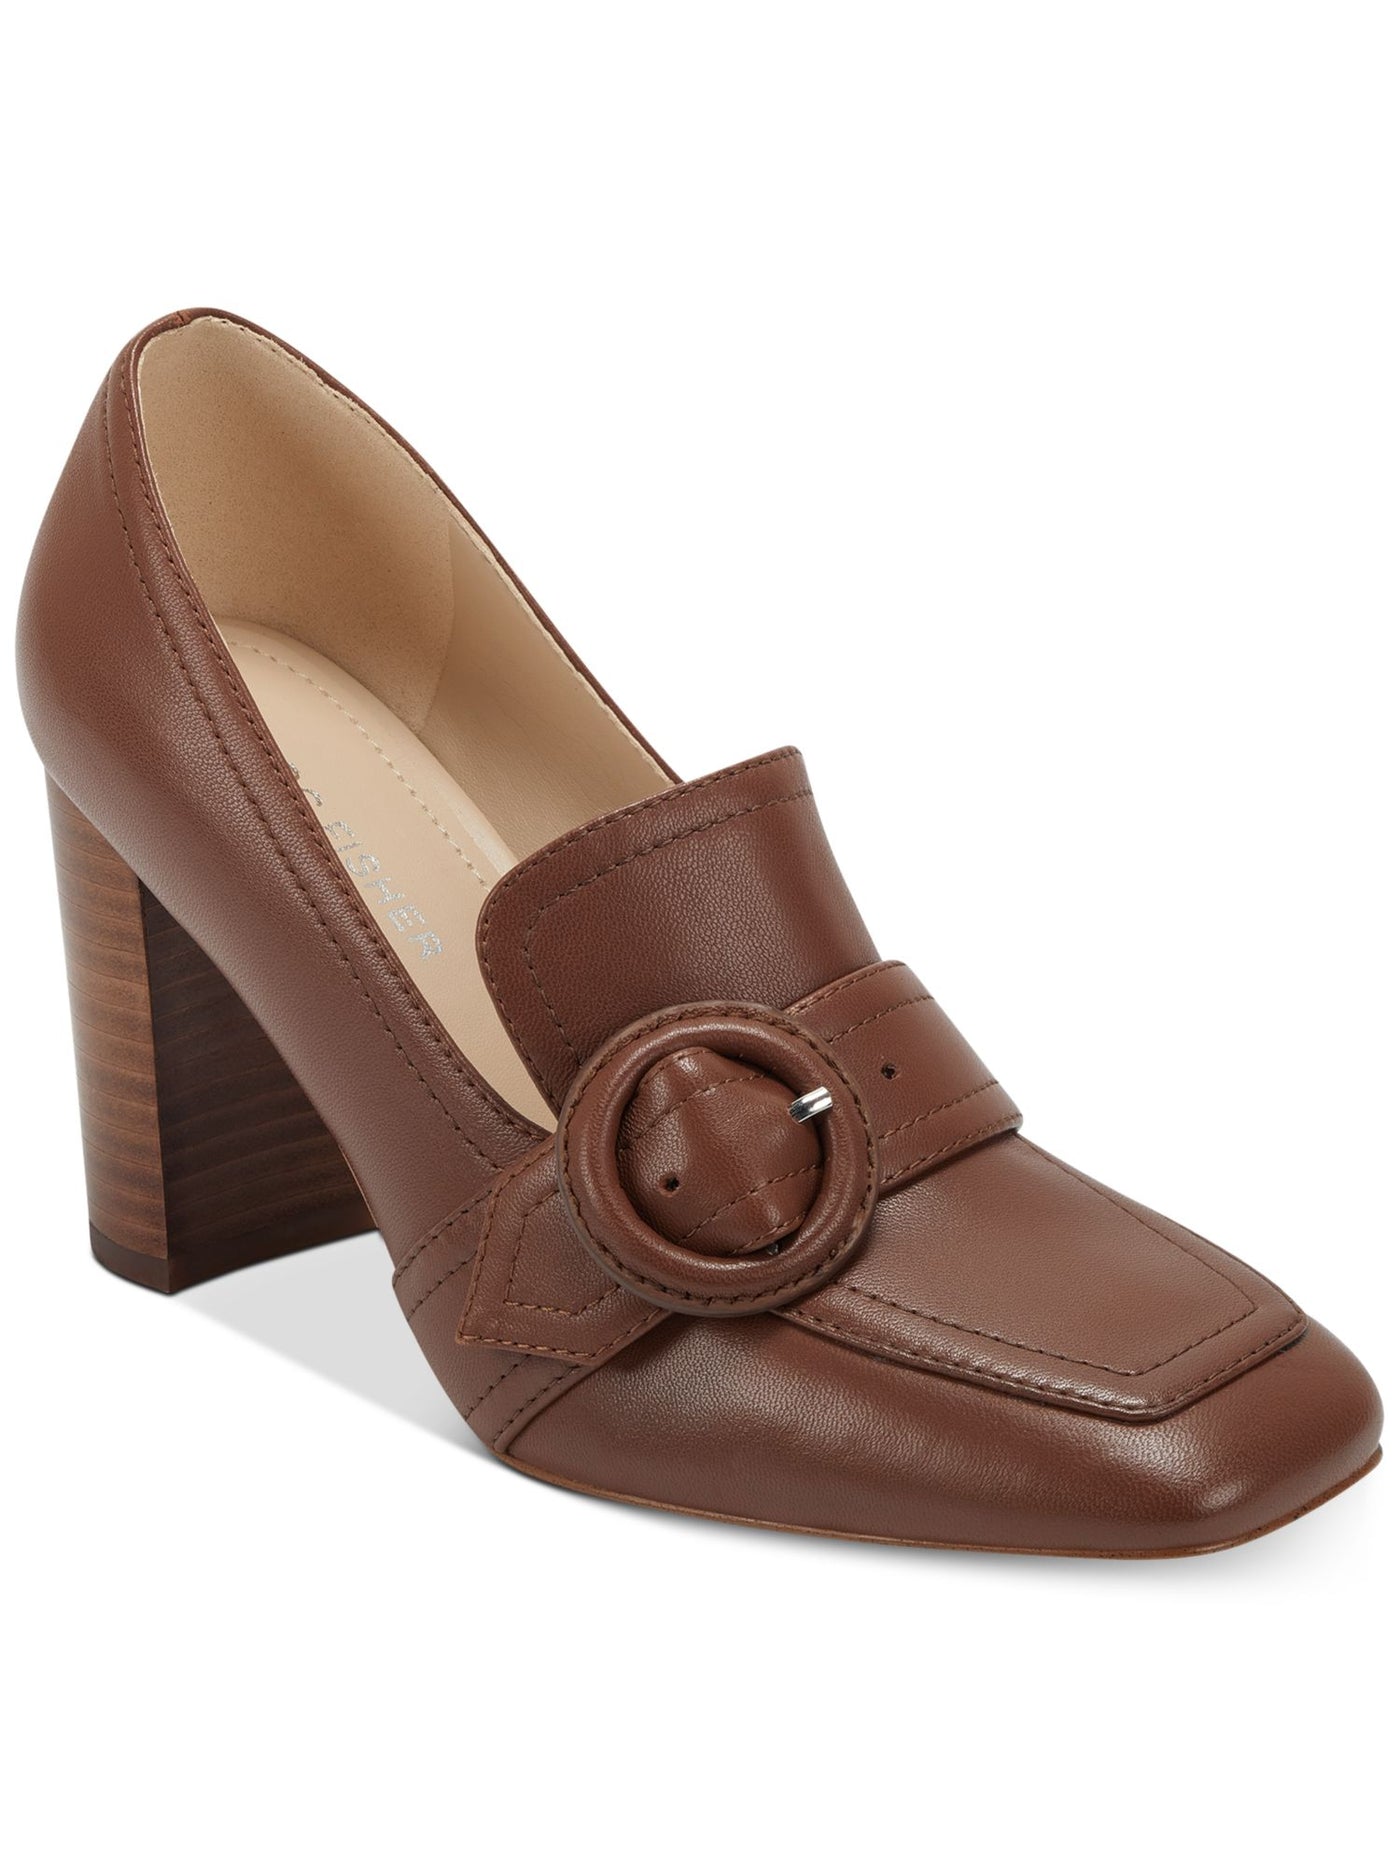 MARC FISHER Womens Brown Snip-Toe Tailored Cushioned Buckle Accent Garlan Square Toe Block Heel Slip On Leather Pumps Shoes 10 M